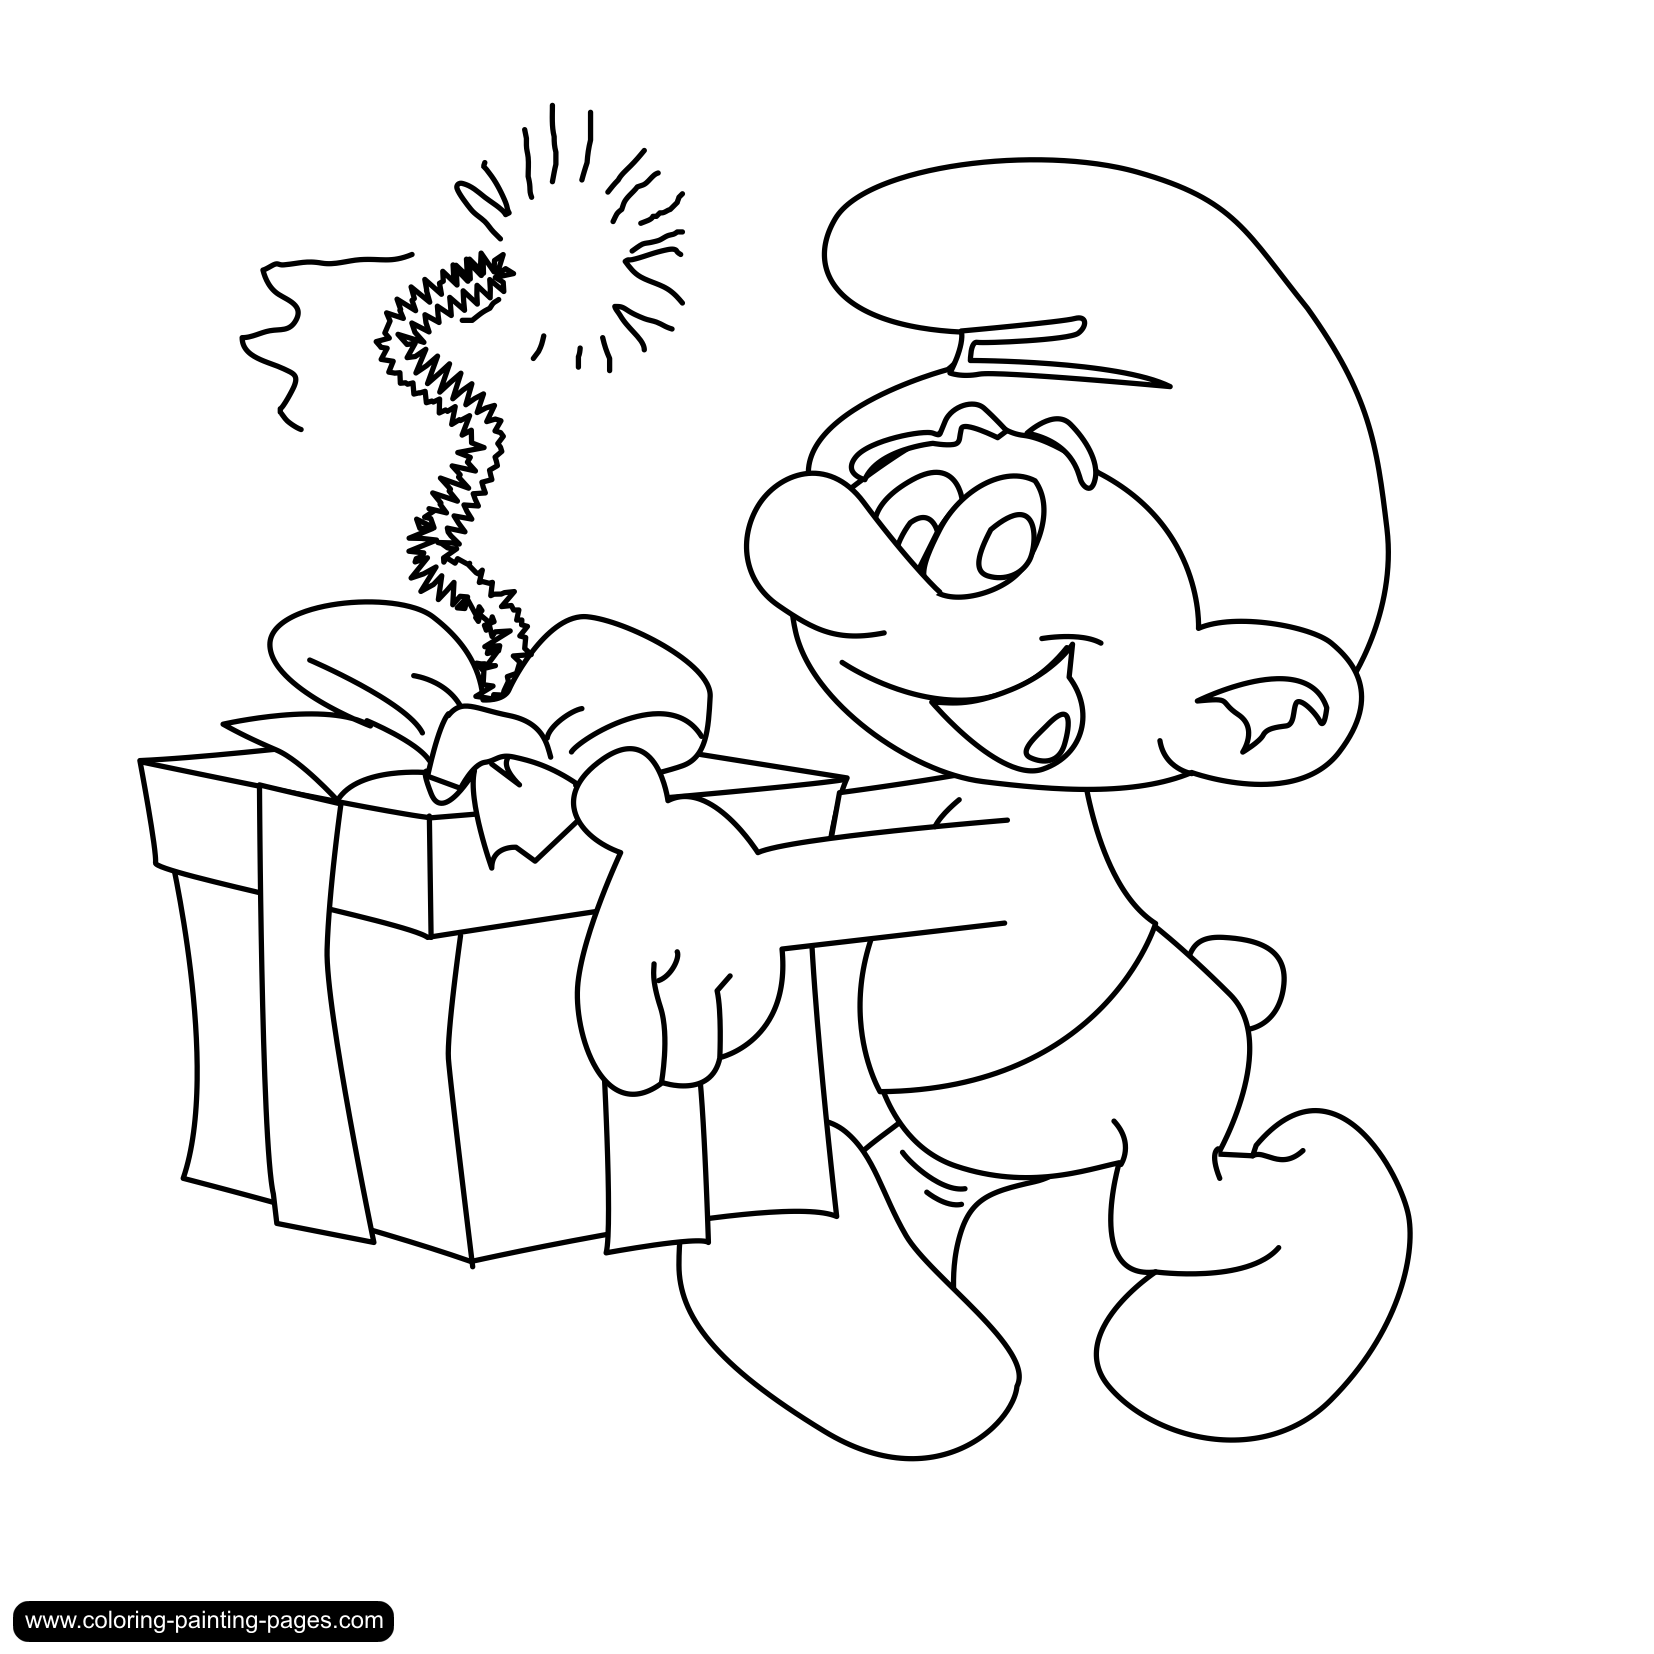 Smurfs Colouring Pages Pdf Smurfs 2 Coloring Pages Online. Kids ...